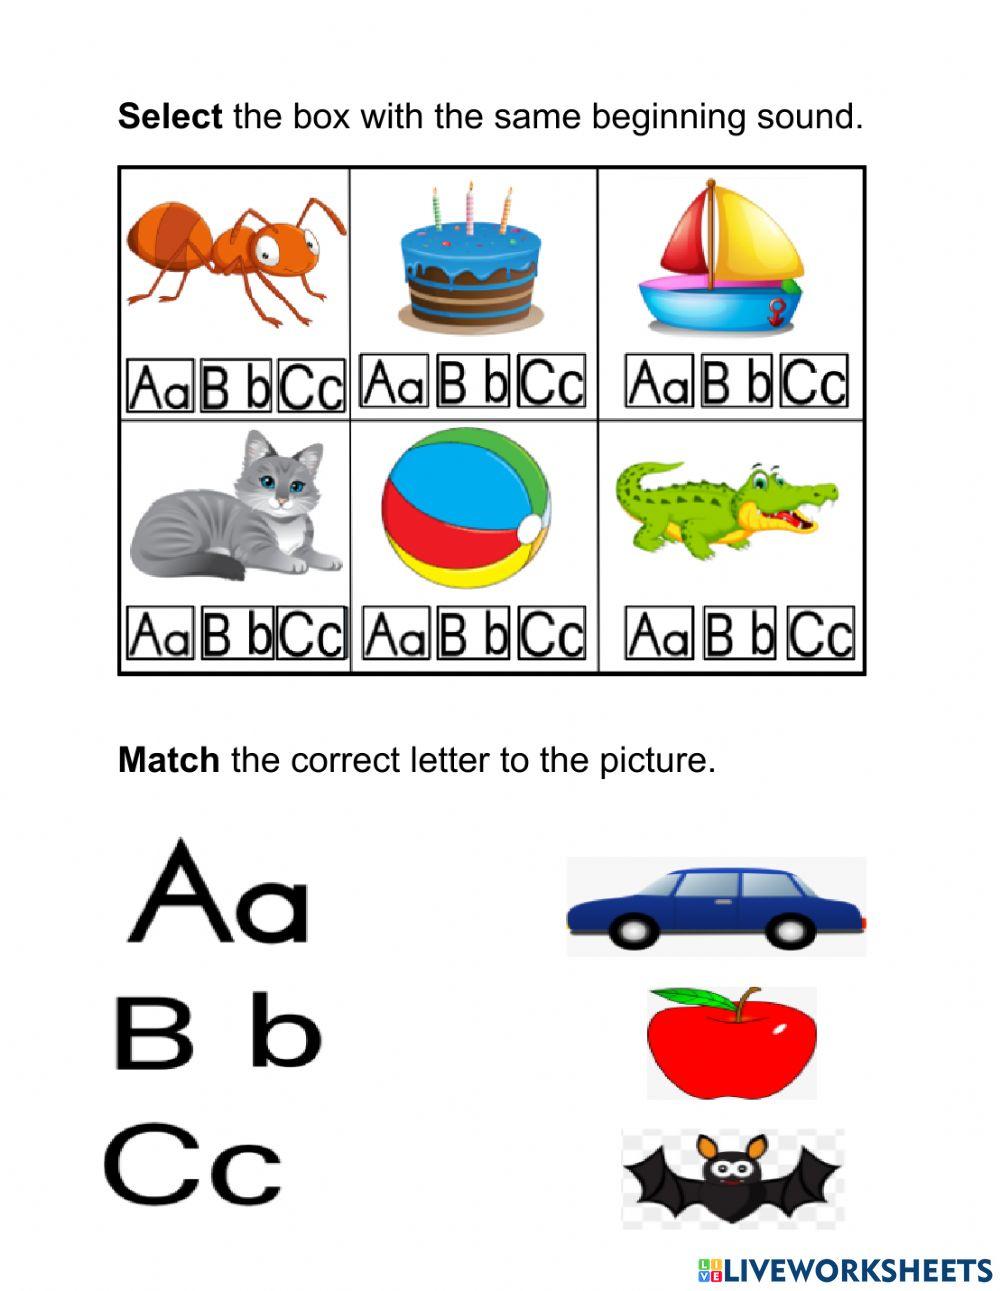 Beginning sounds from Aa-Cc